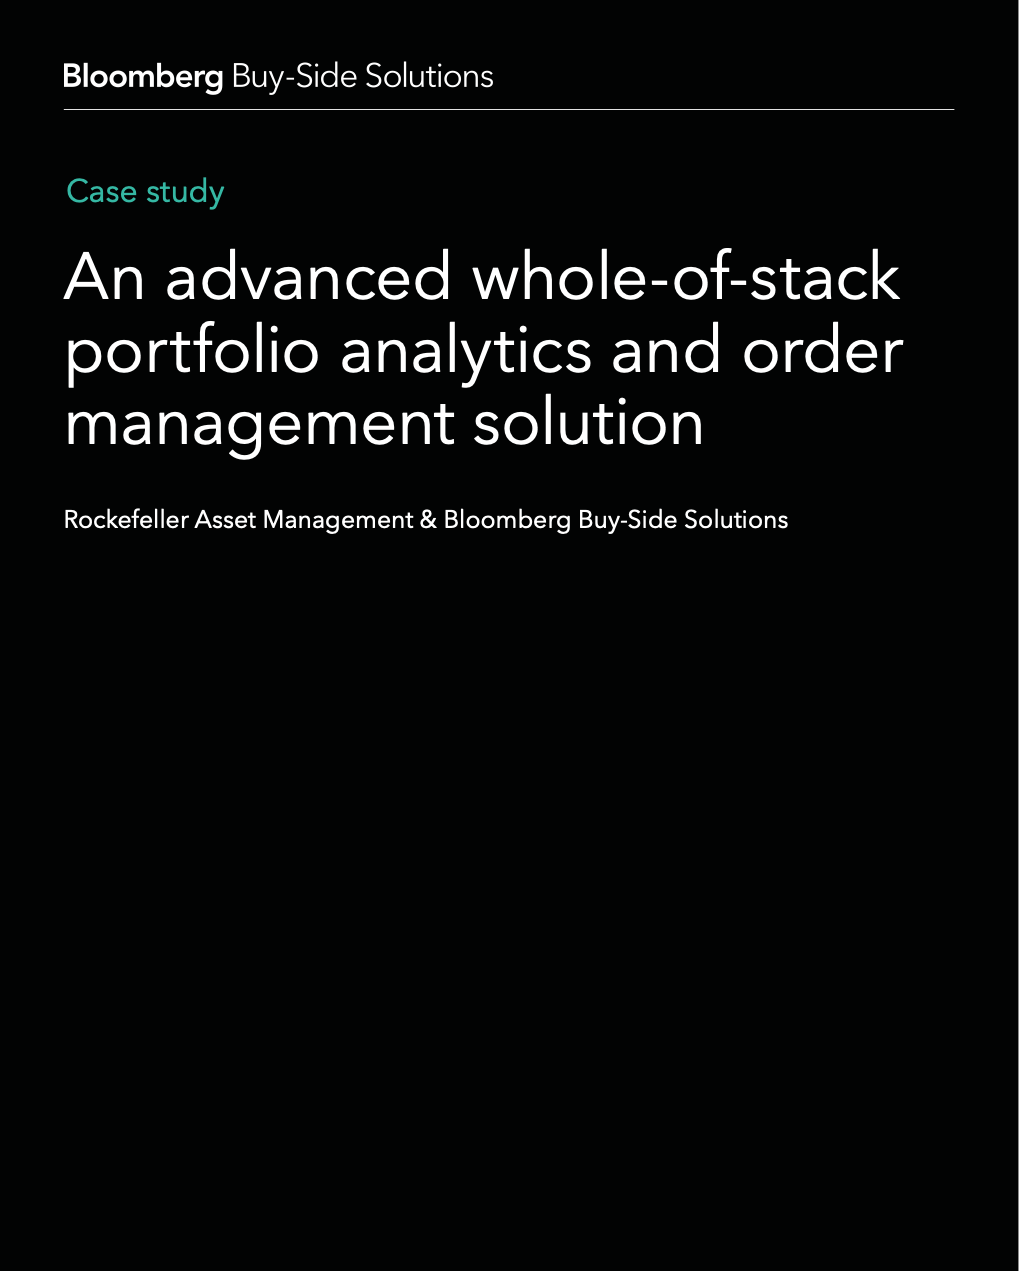 An advanced whole-of-stack portfolio analytics and order management solution